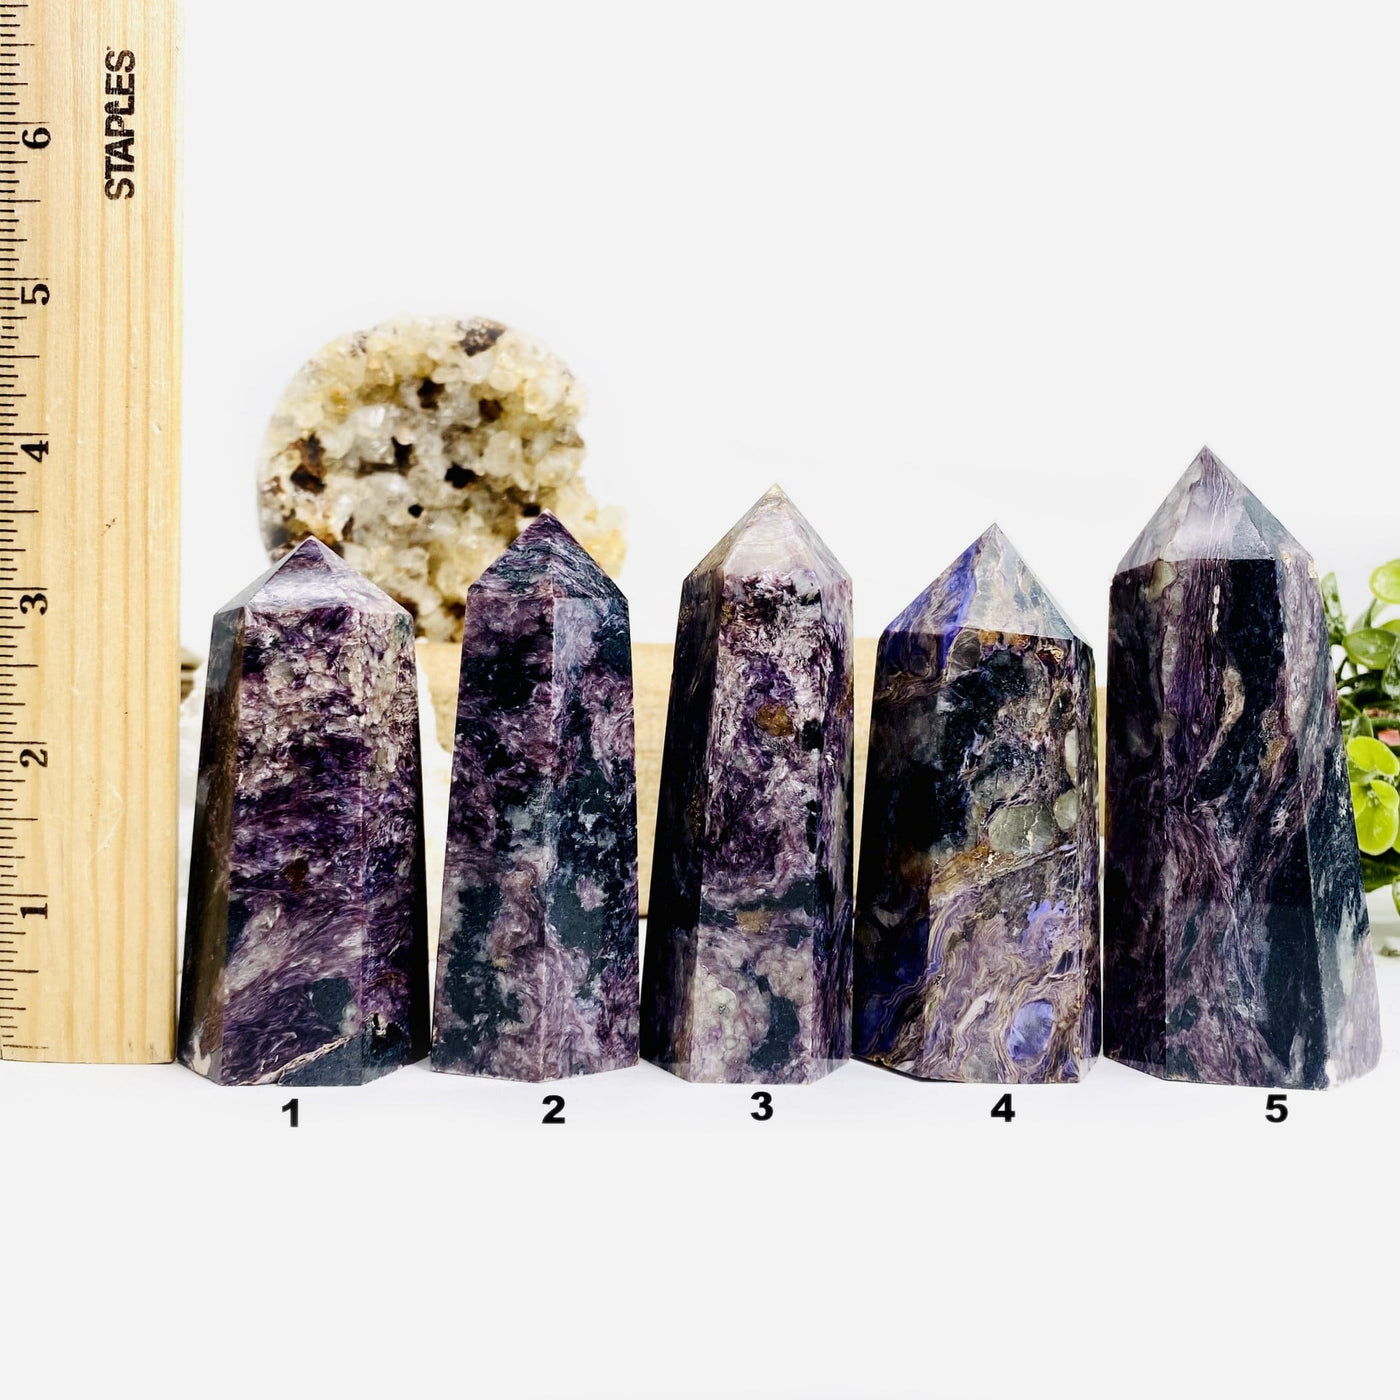 5 Charoite Polished Towers next to a ruler for size reference